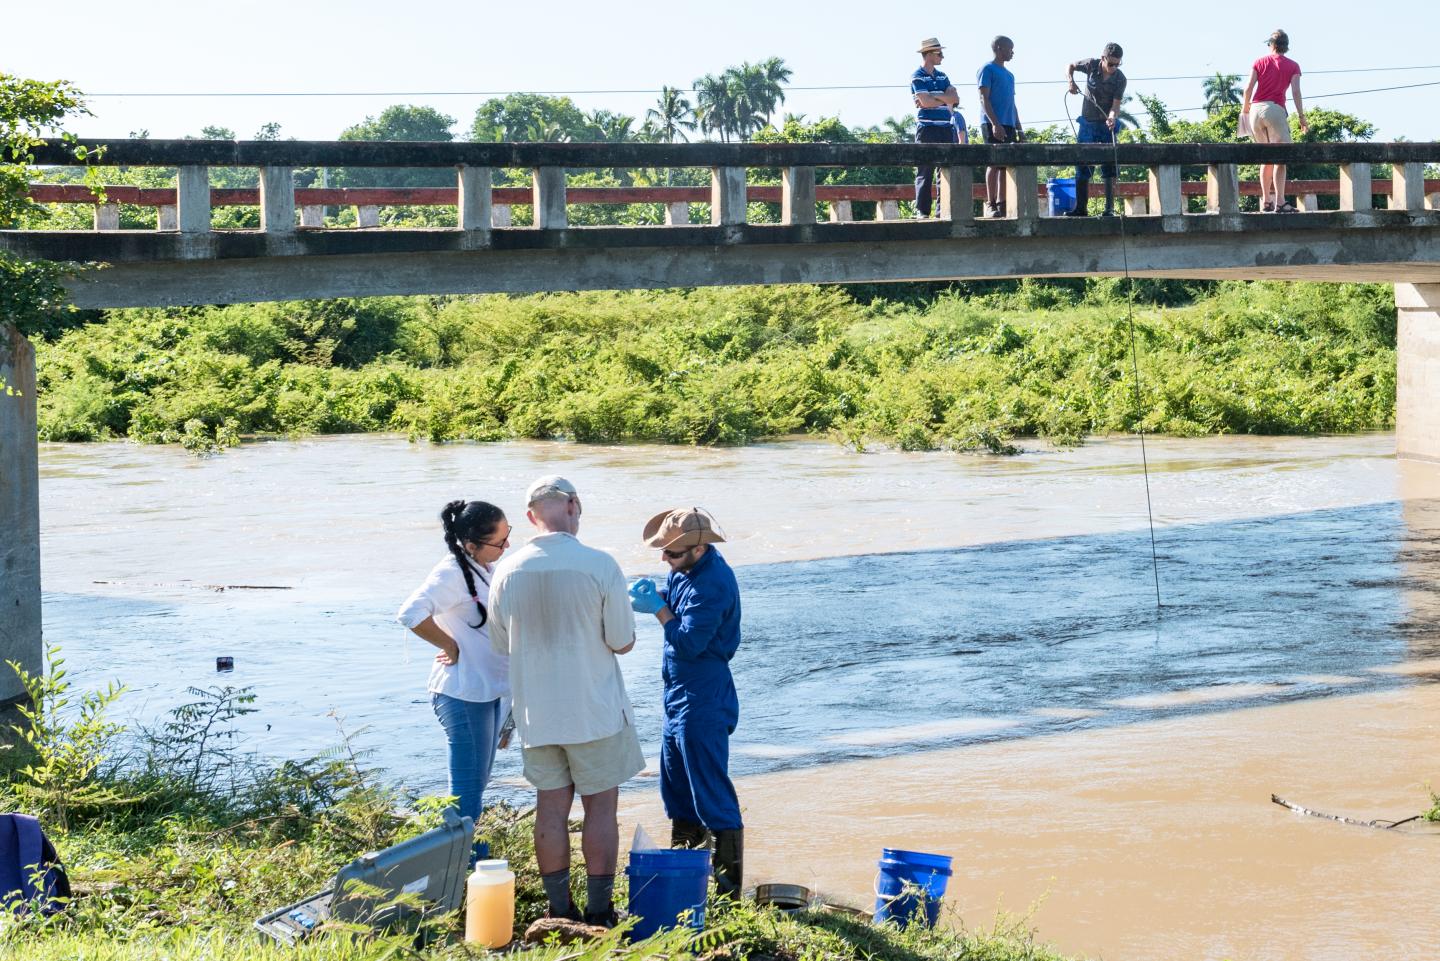 USand Cuban scientists collects river water samples